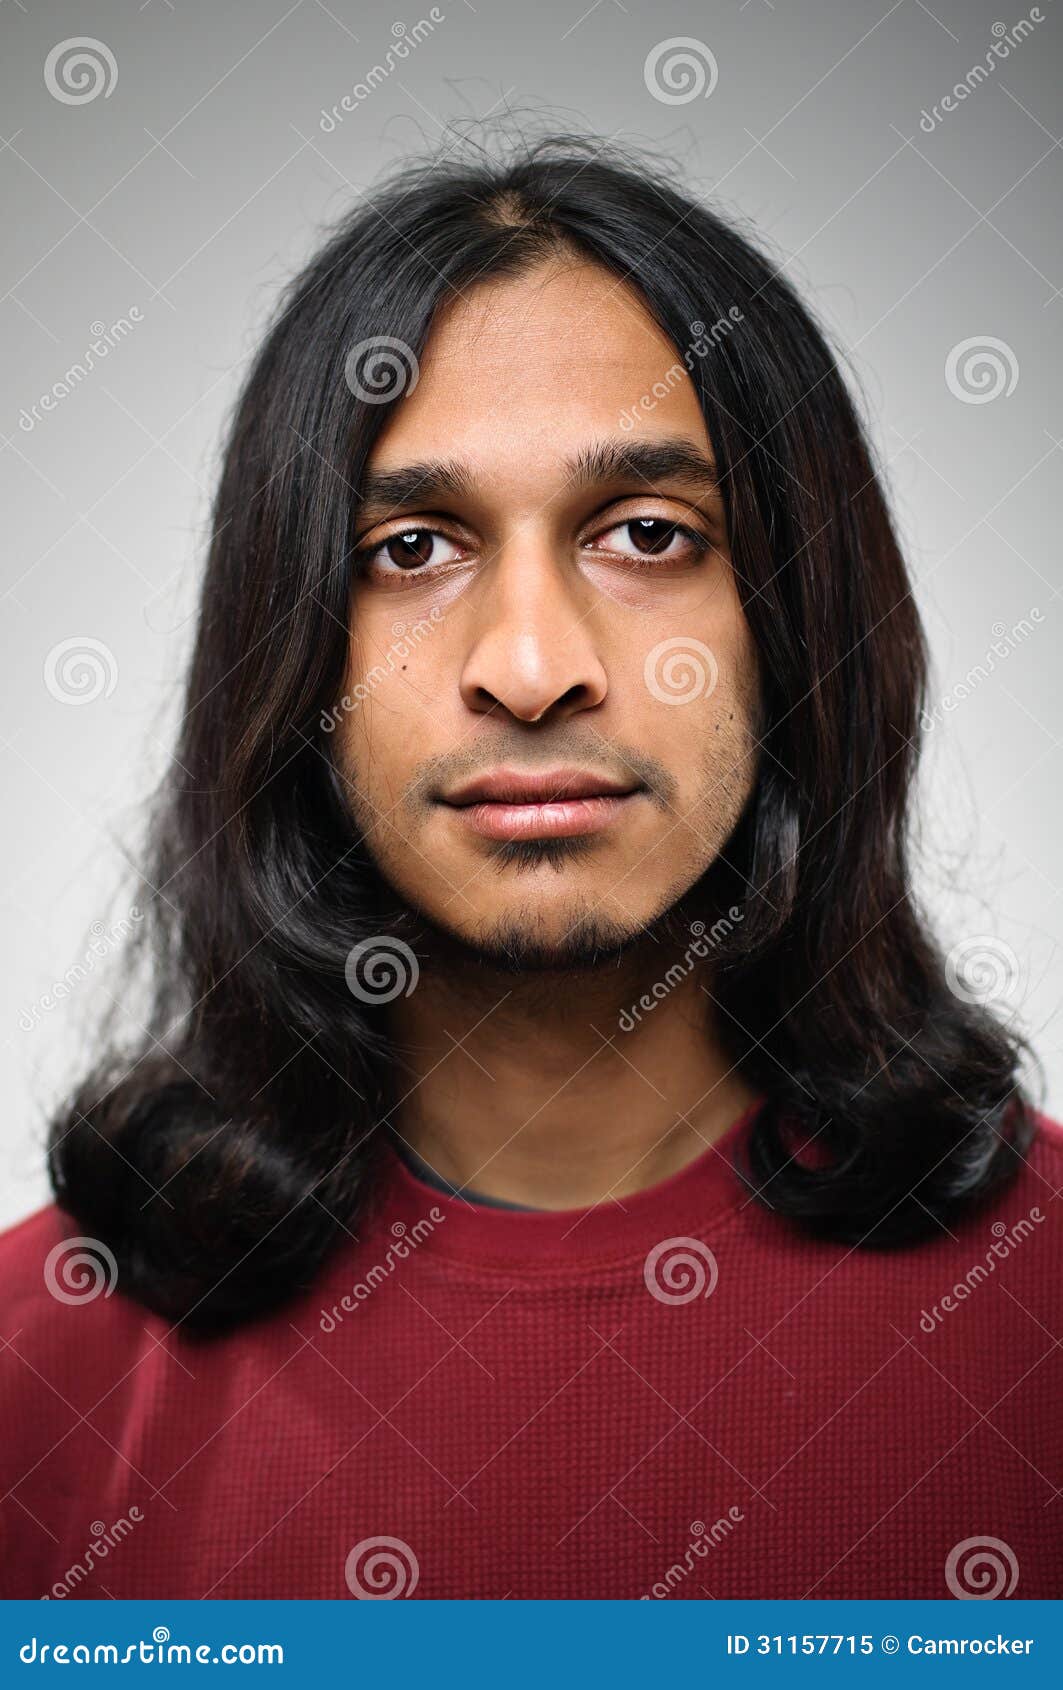 Young Indian Ethnic Man Blank Expression Stock Image - Image of shot,  looking: 31157715